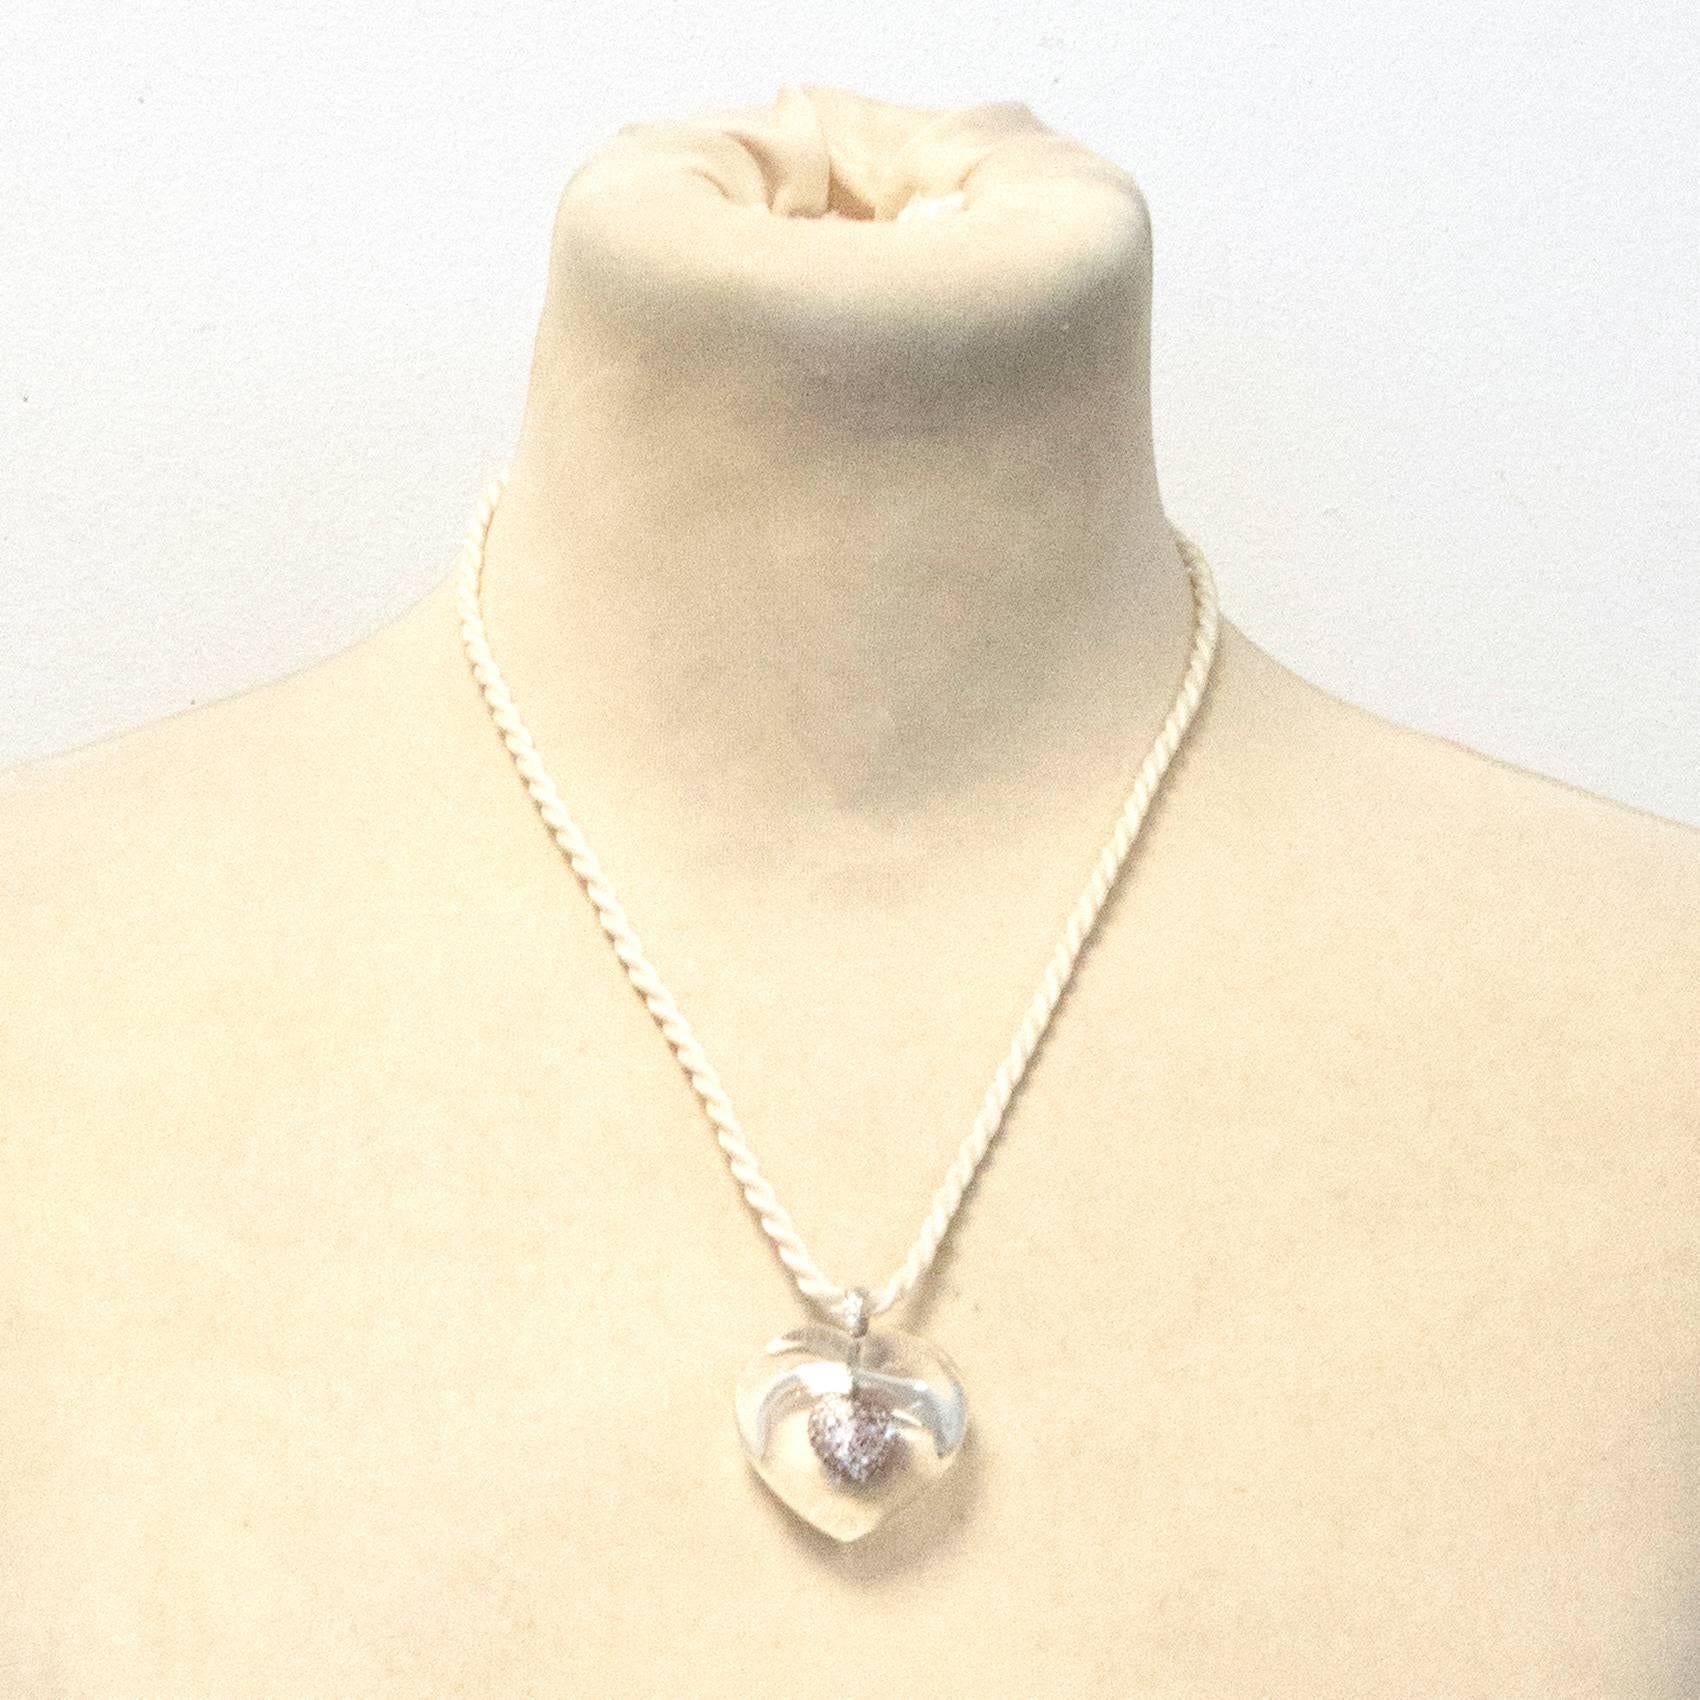 18 Carat Heart Necklace with a Crystal Heart Pendant For Sale 1